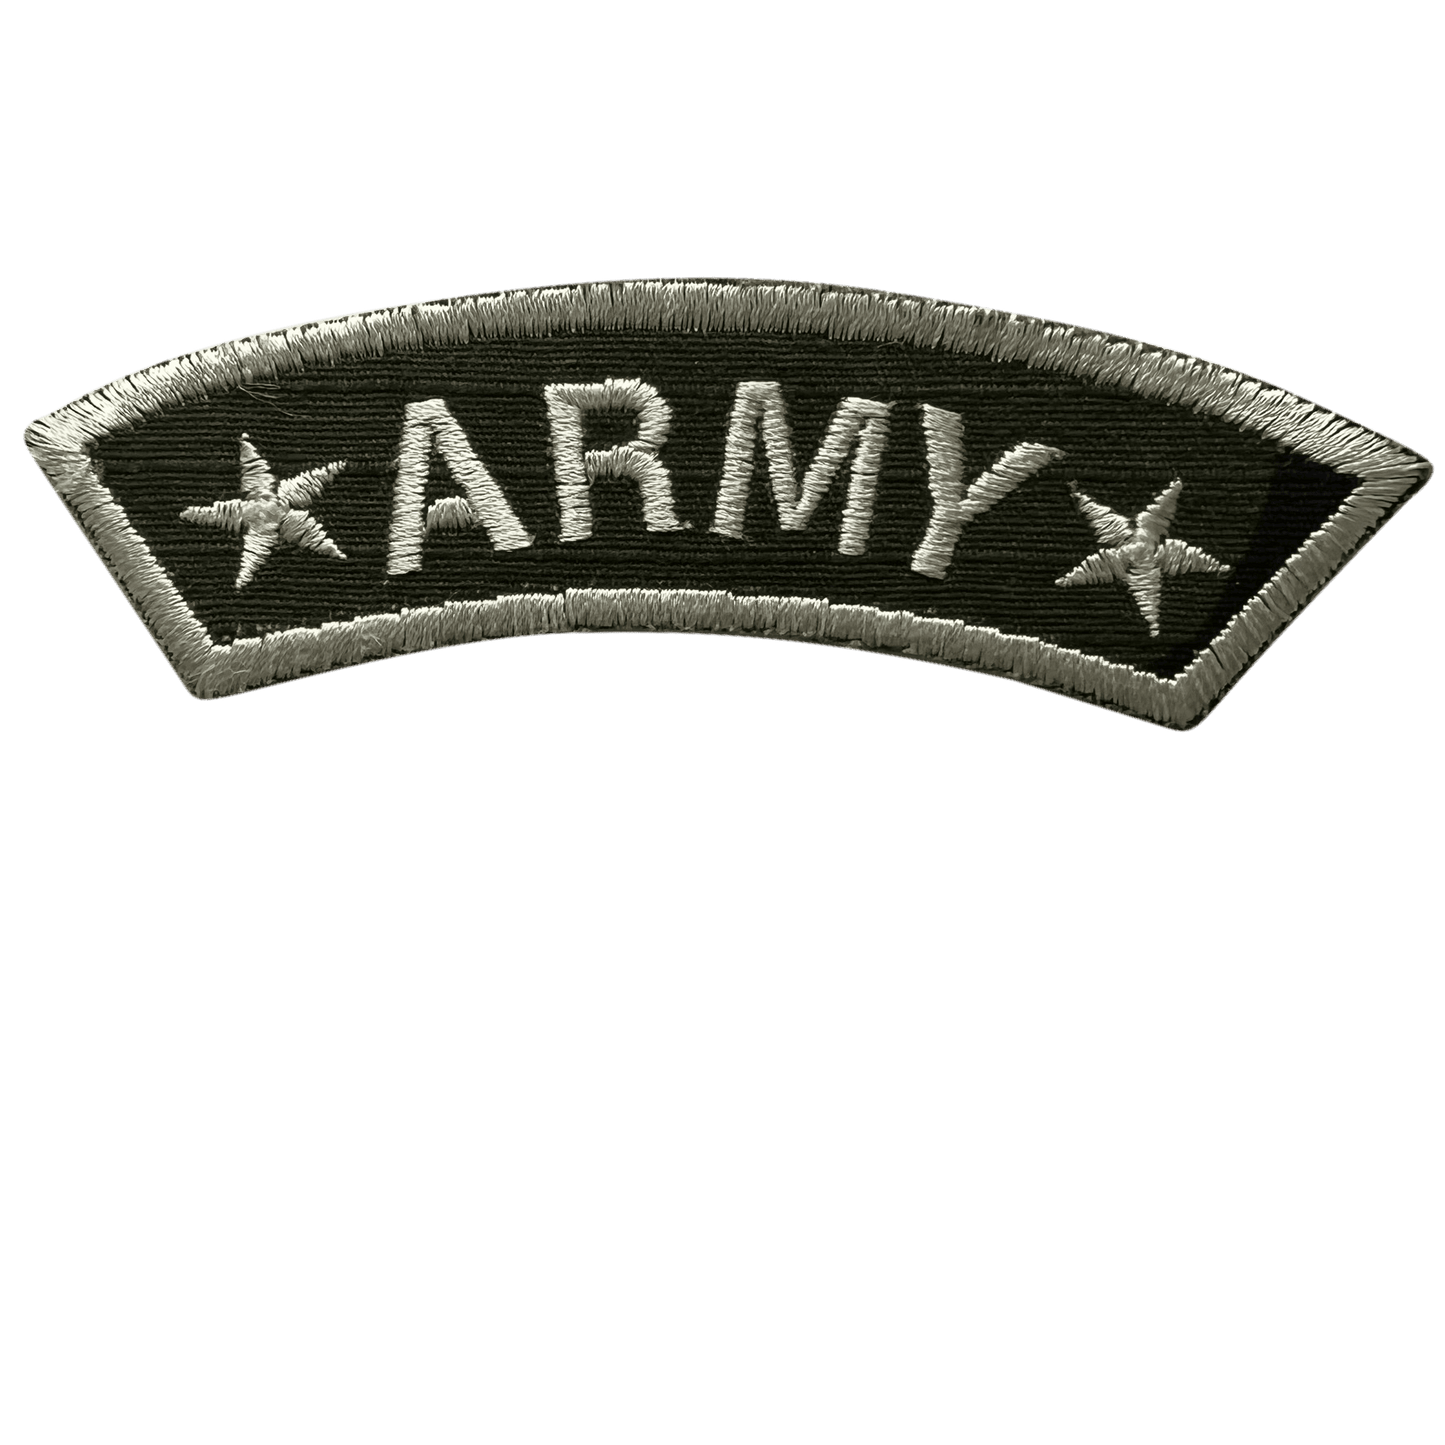 ARMY Patch Iron On Sew On Military Uniform Fancy Dress Costume Embroidered Badge